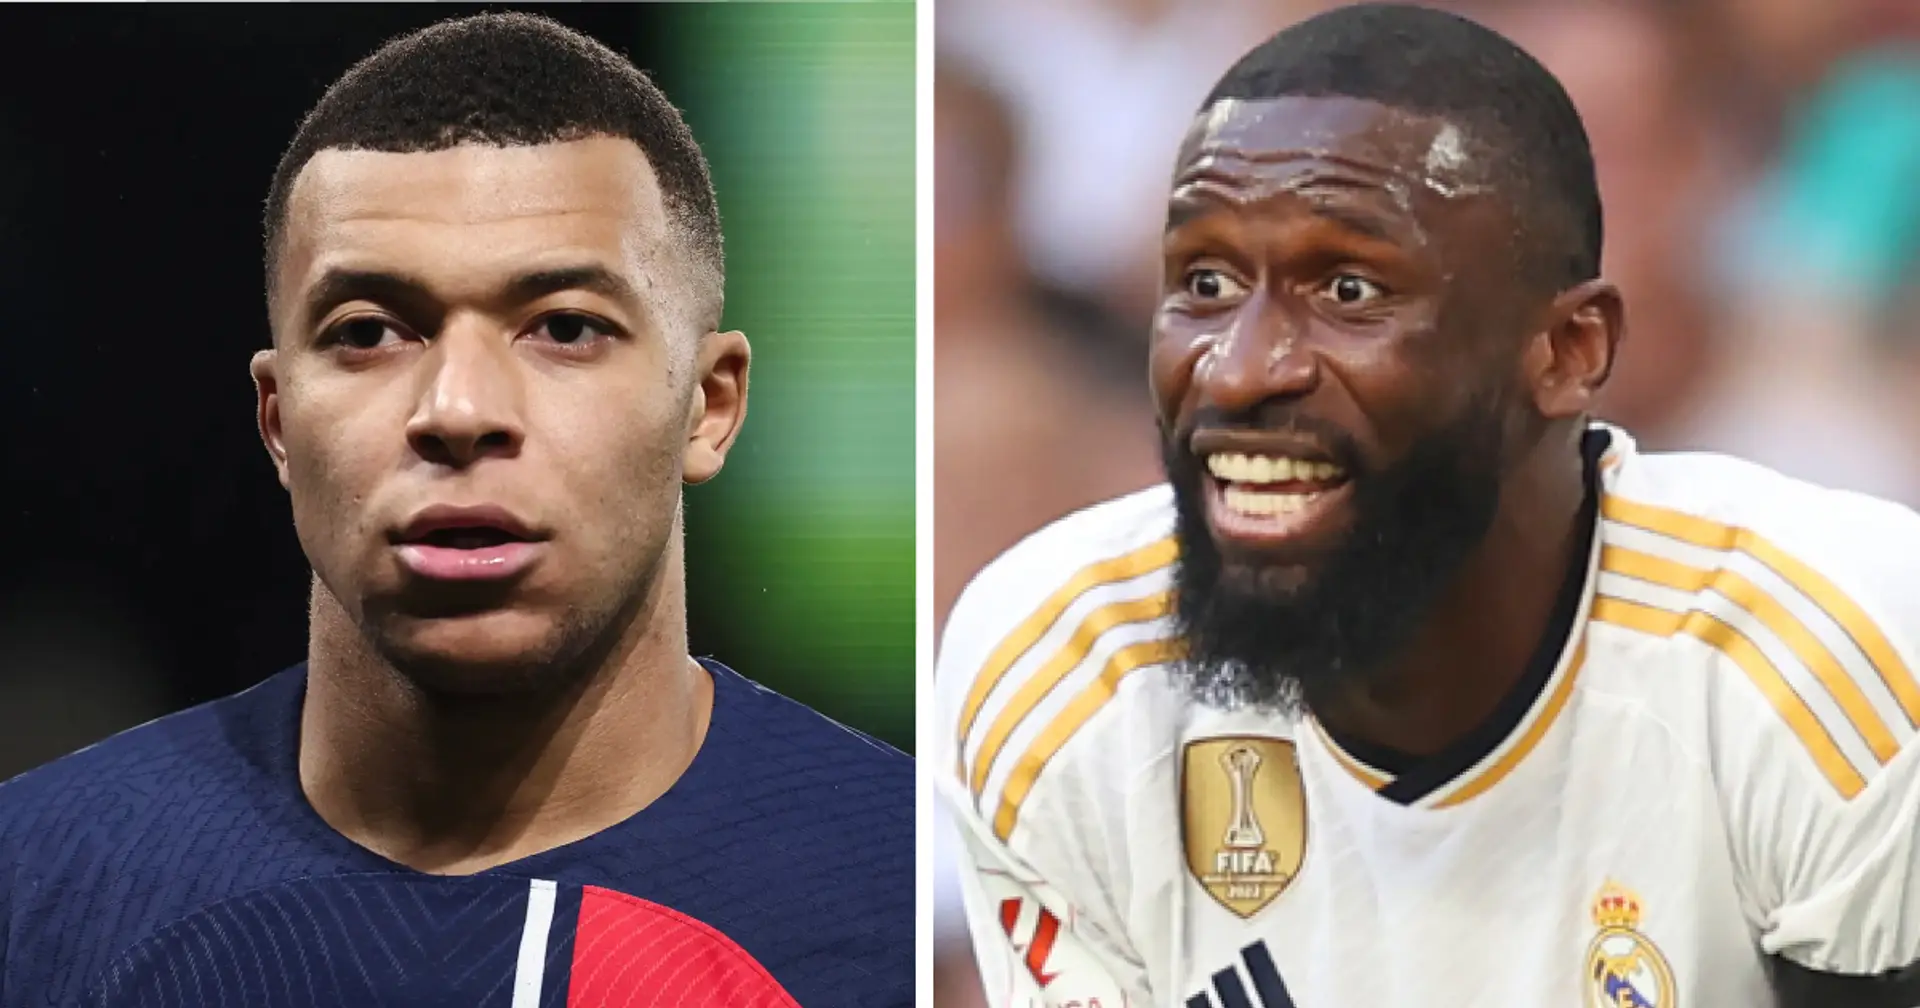 Mbappe's potential salary at Real Madrid and 2 more big stories you might've missed